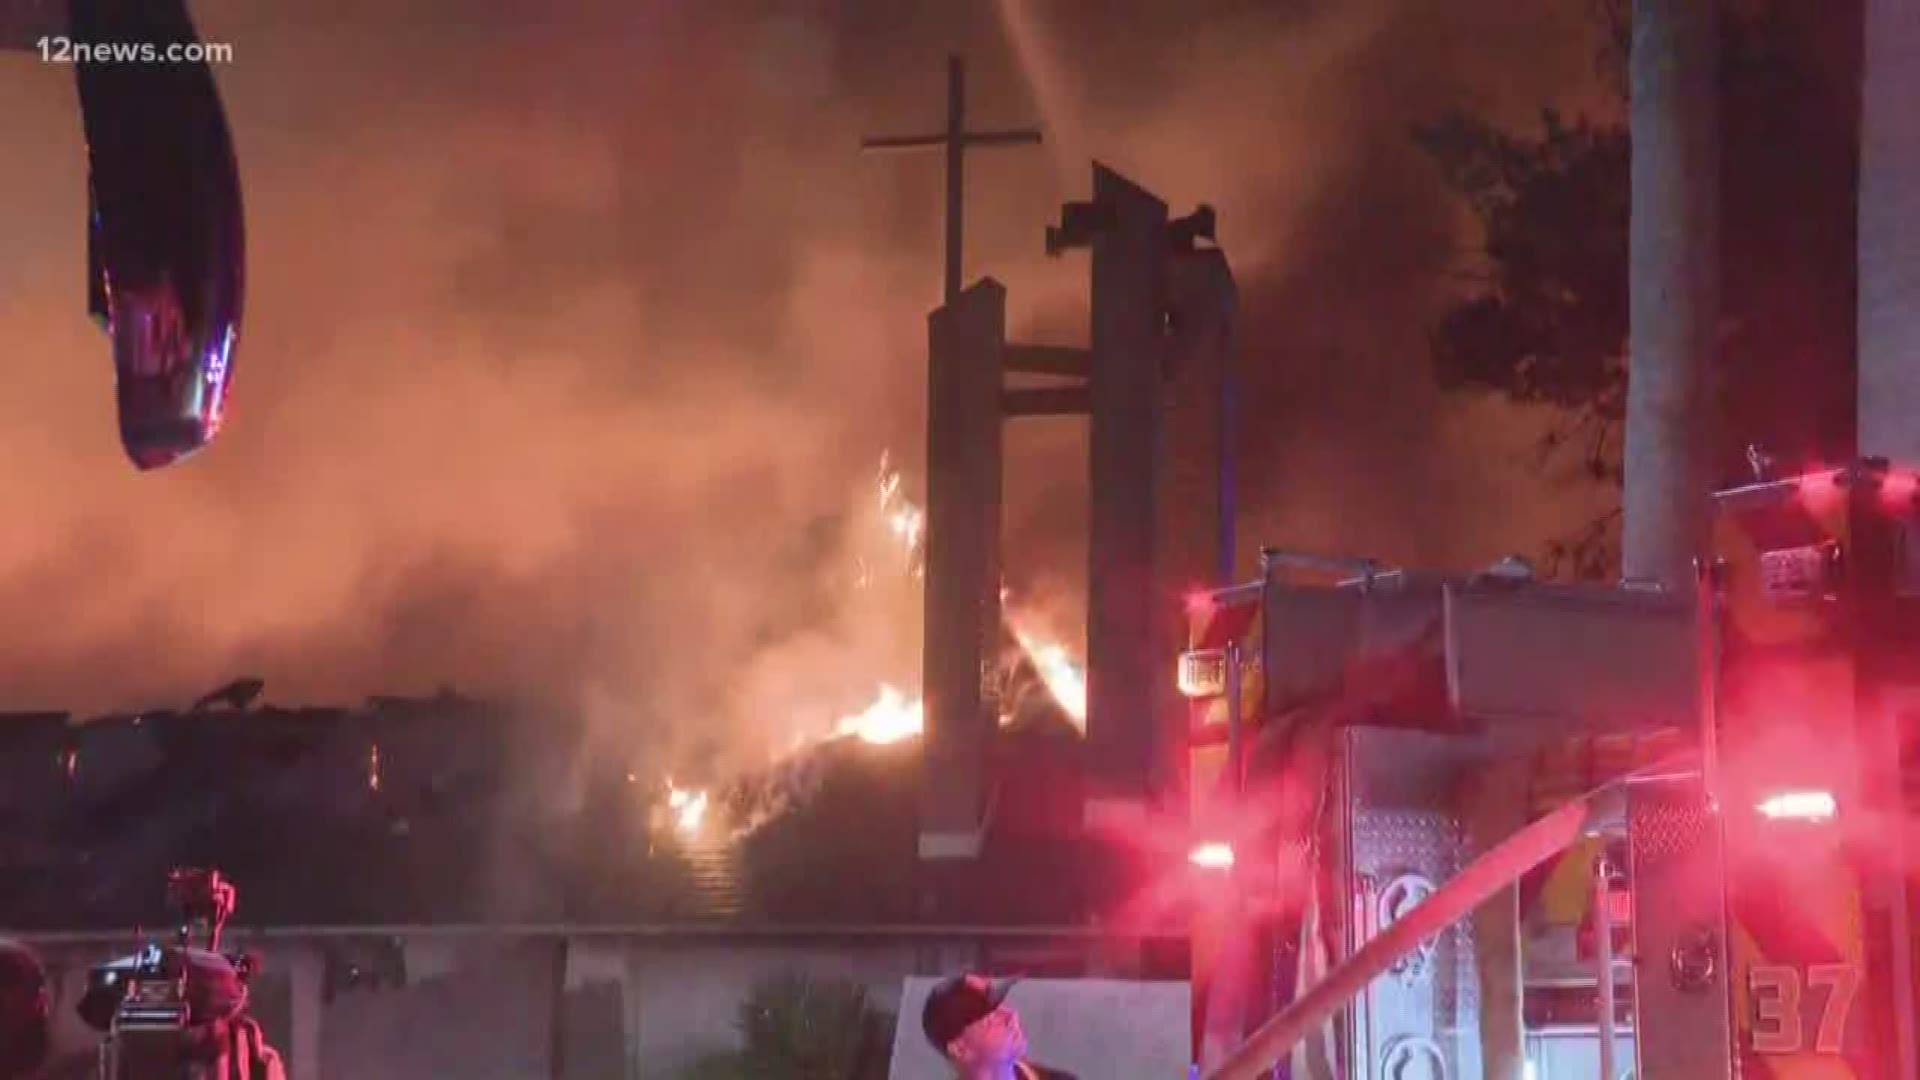 A fire has destroyed St. Joseph Catholic Church and the history of the 50-year-old church.